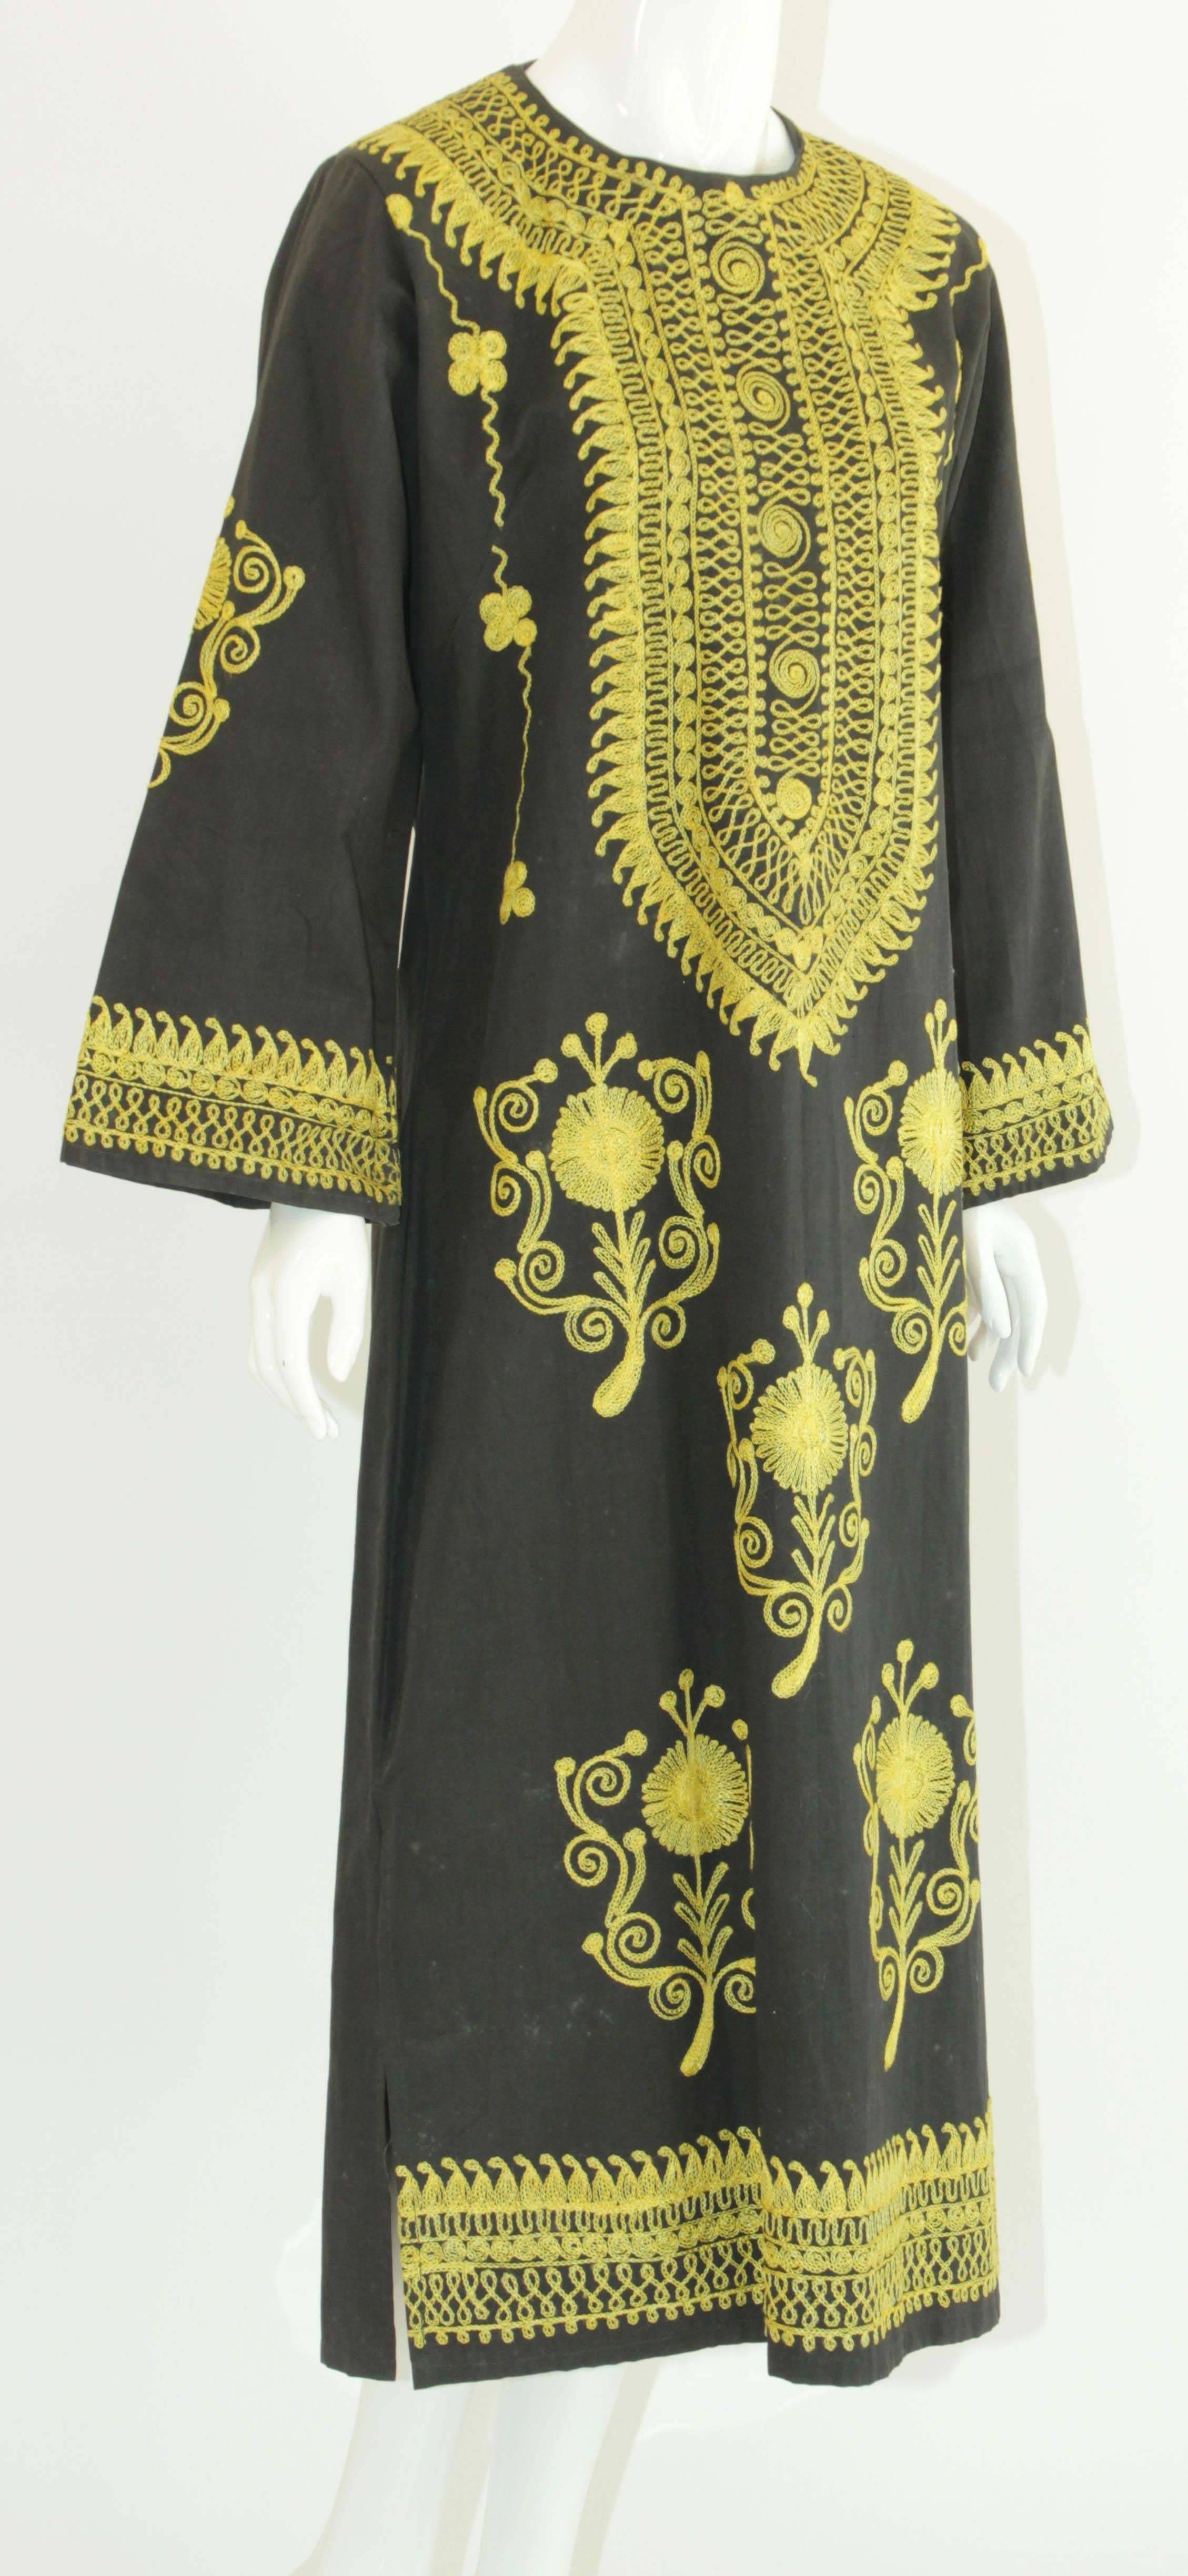 Vintage Moorish Middle Eastern Afghan Ethnic black caftan, circa 1970s.
Vintage Bohemian style long Dress kaftan. 
Side slits along the maxi dress keep things cool.
Nice embroidered in yellow gold threads.
Long sleeves.
Size medium.
Measurements: